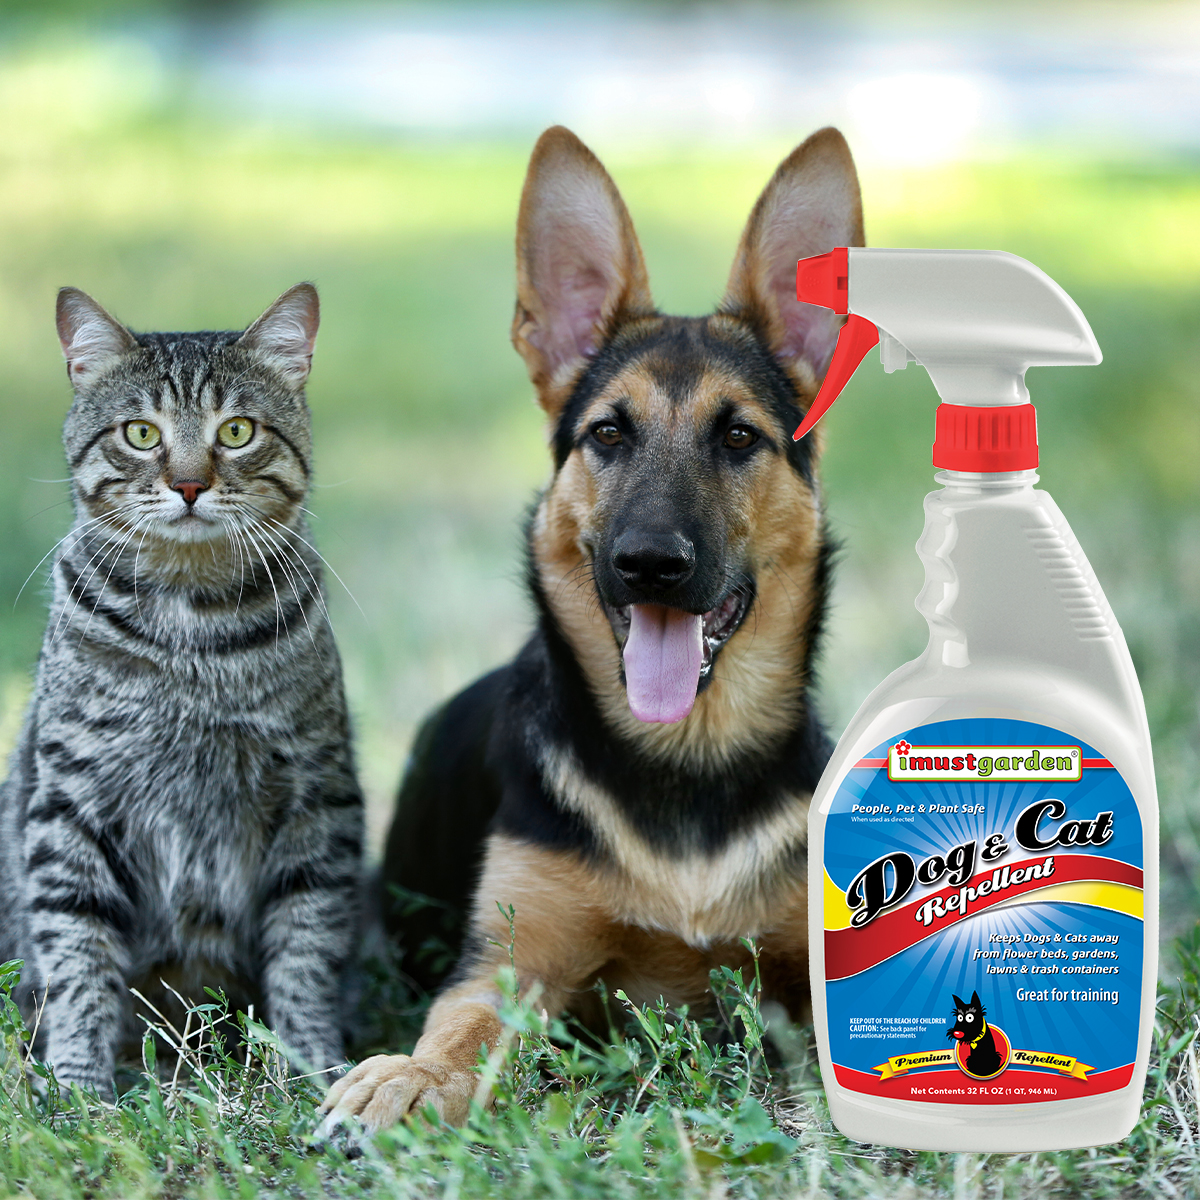 Product Image of Dog & Cat Repellent 32oz ready-to-use